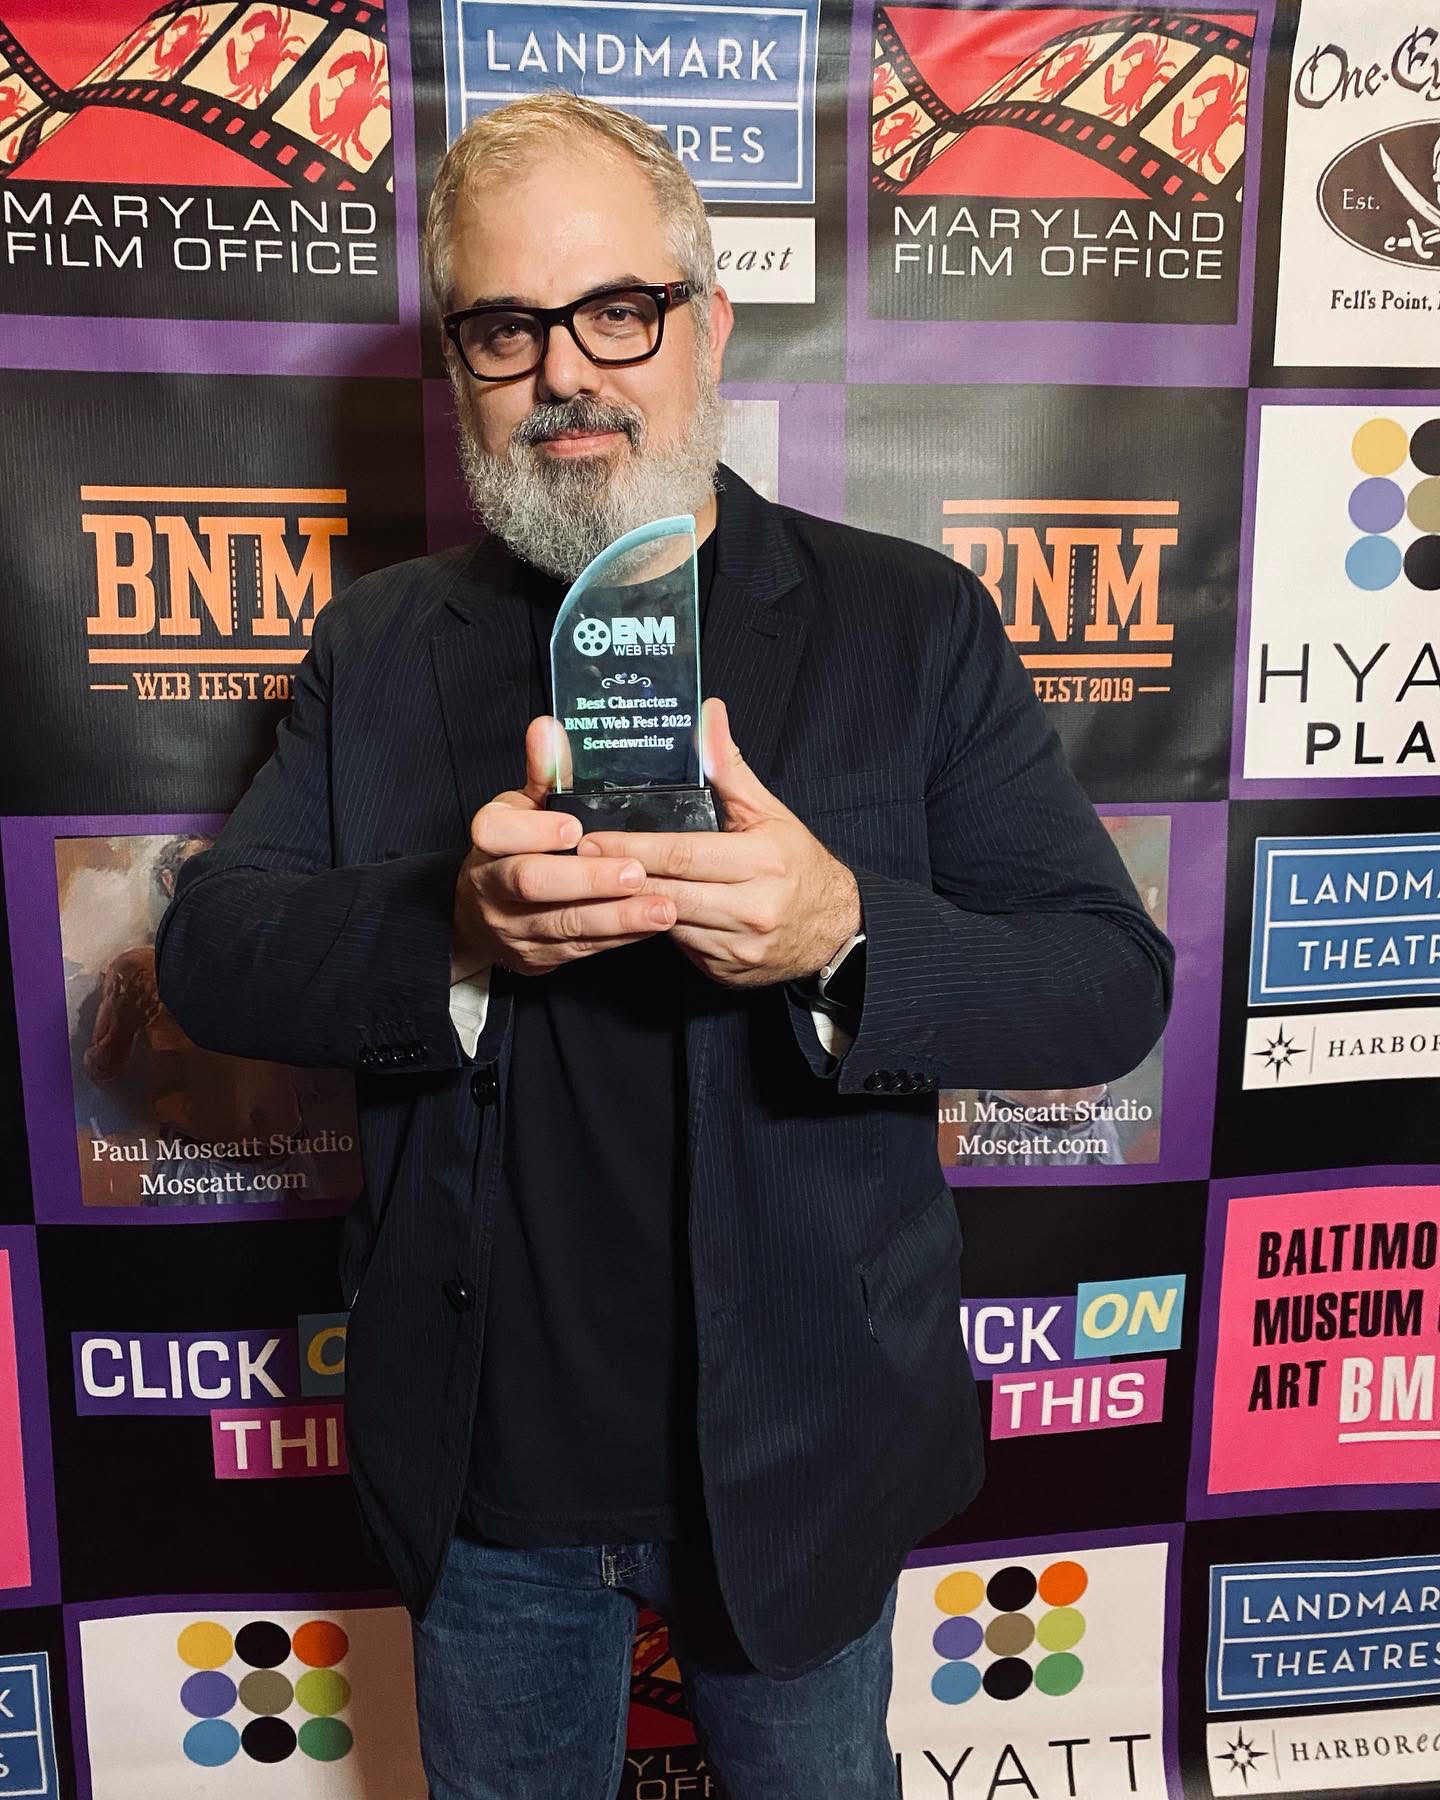 A photo of Joseph Ross Angelella holding an award standing in front of a step and repeat backdrop